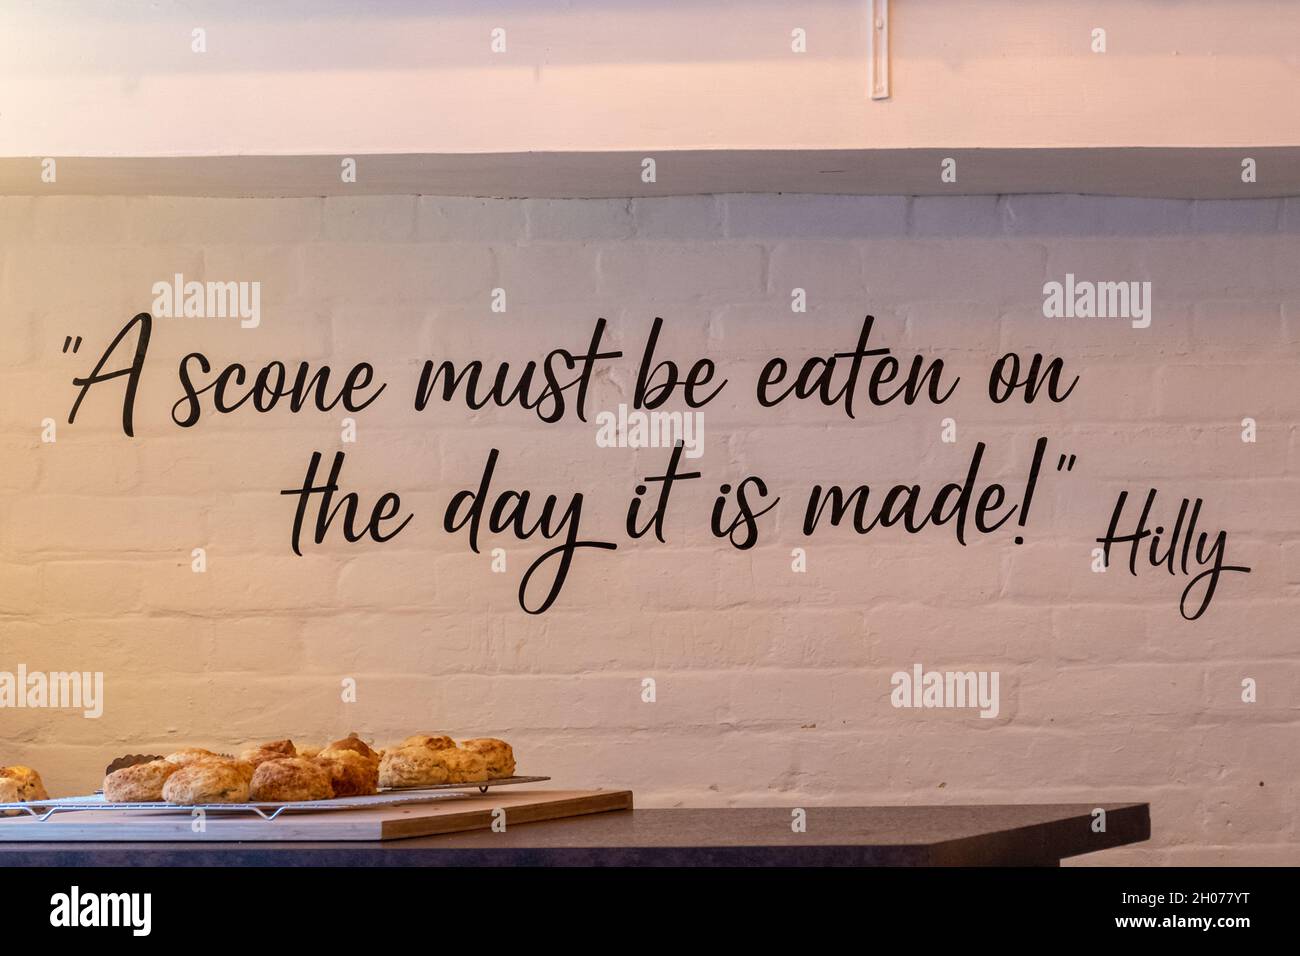 Interior of Hilly's tea shop with her quote, 'A scone must be eaten on the day it is made' painted on the wall, Shere village, Surrey, England, UK Stock Photo